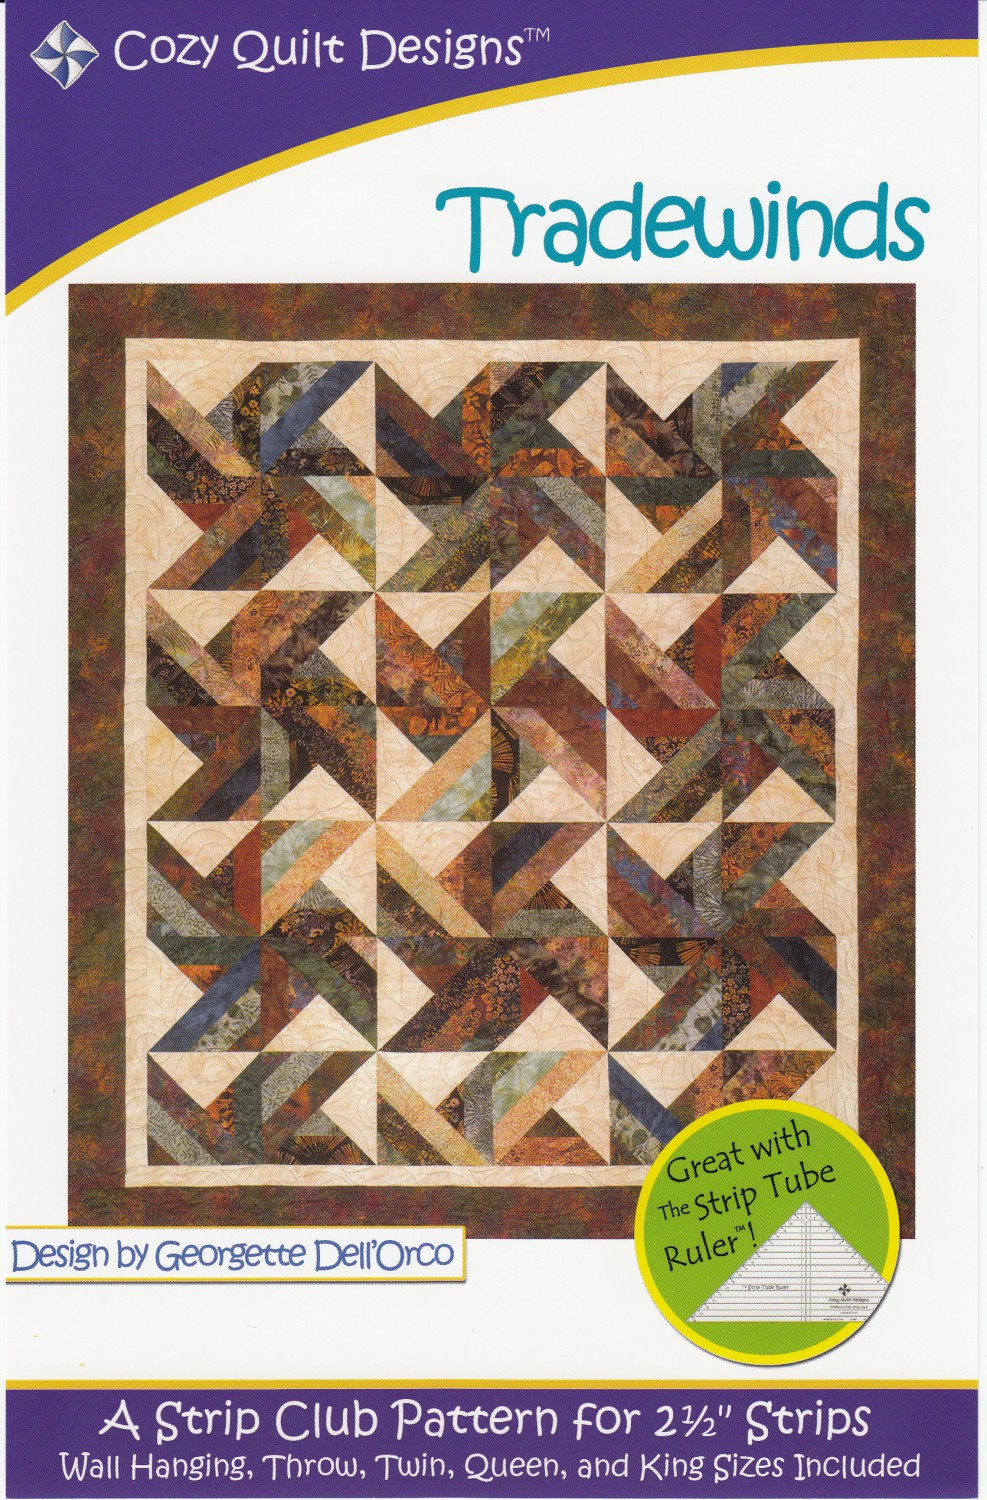 Cozy Quilt Designs Trade Winds Quilt Pattern